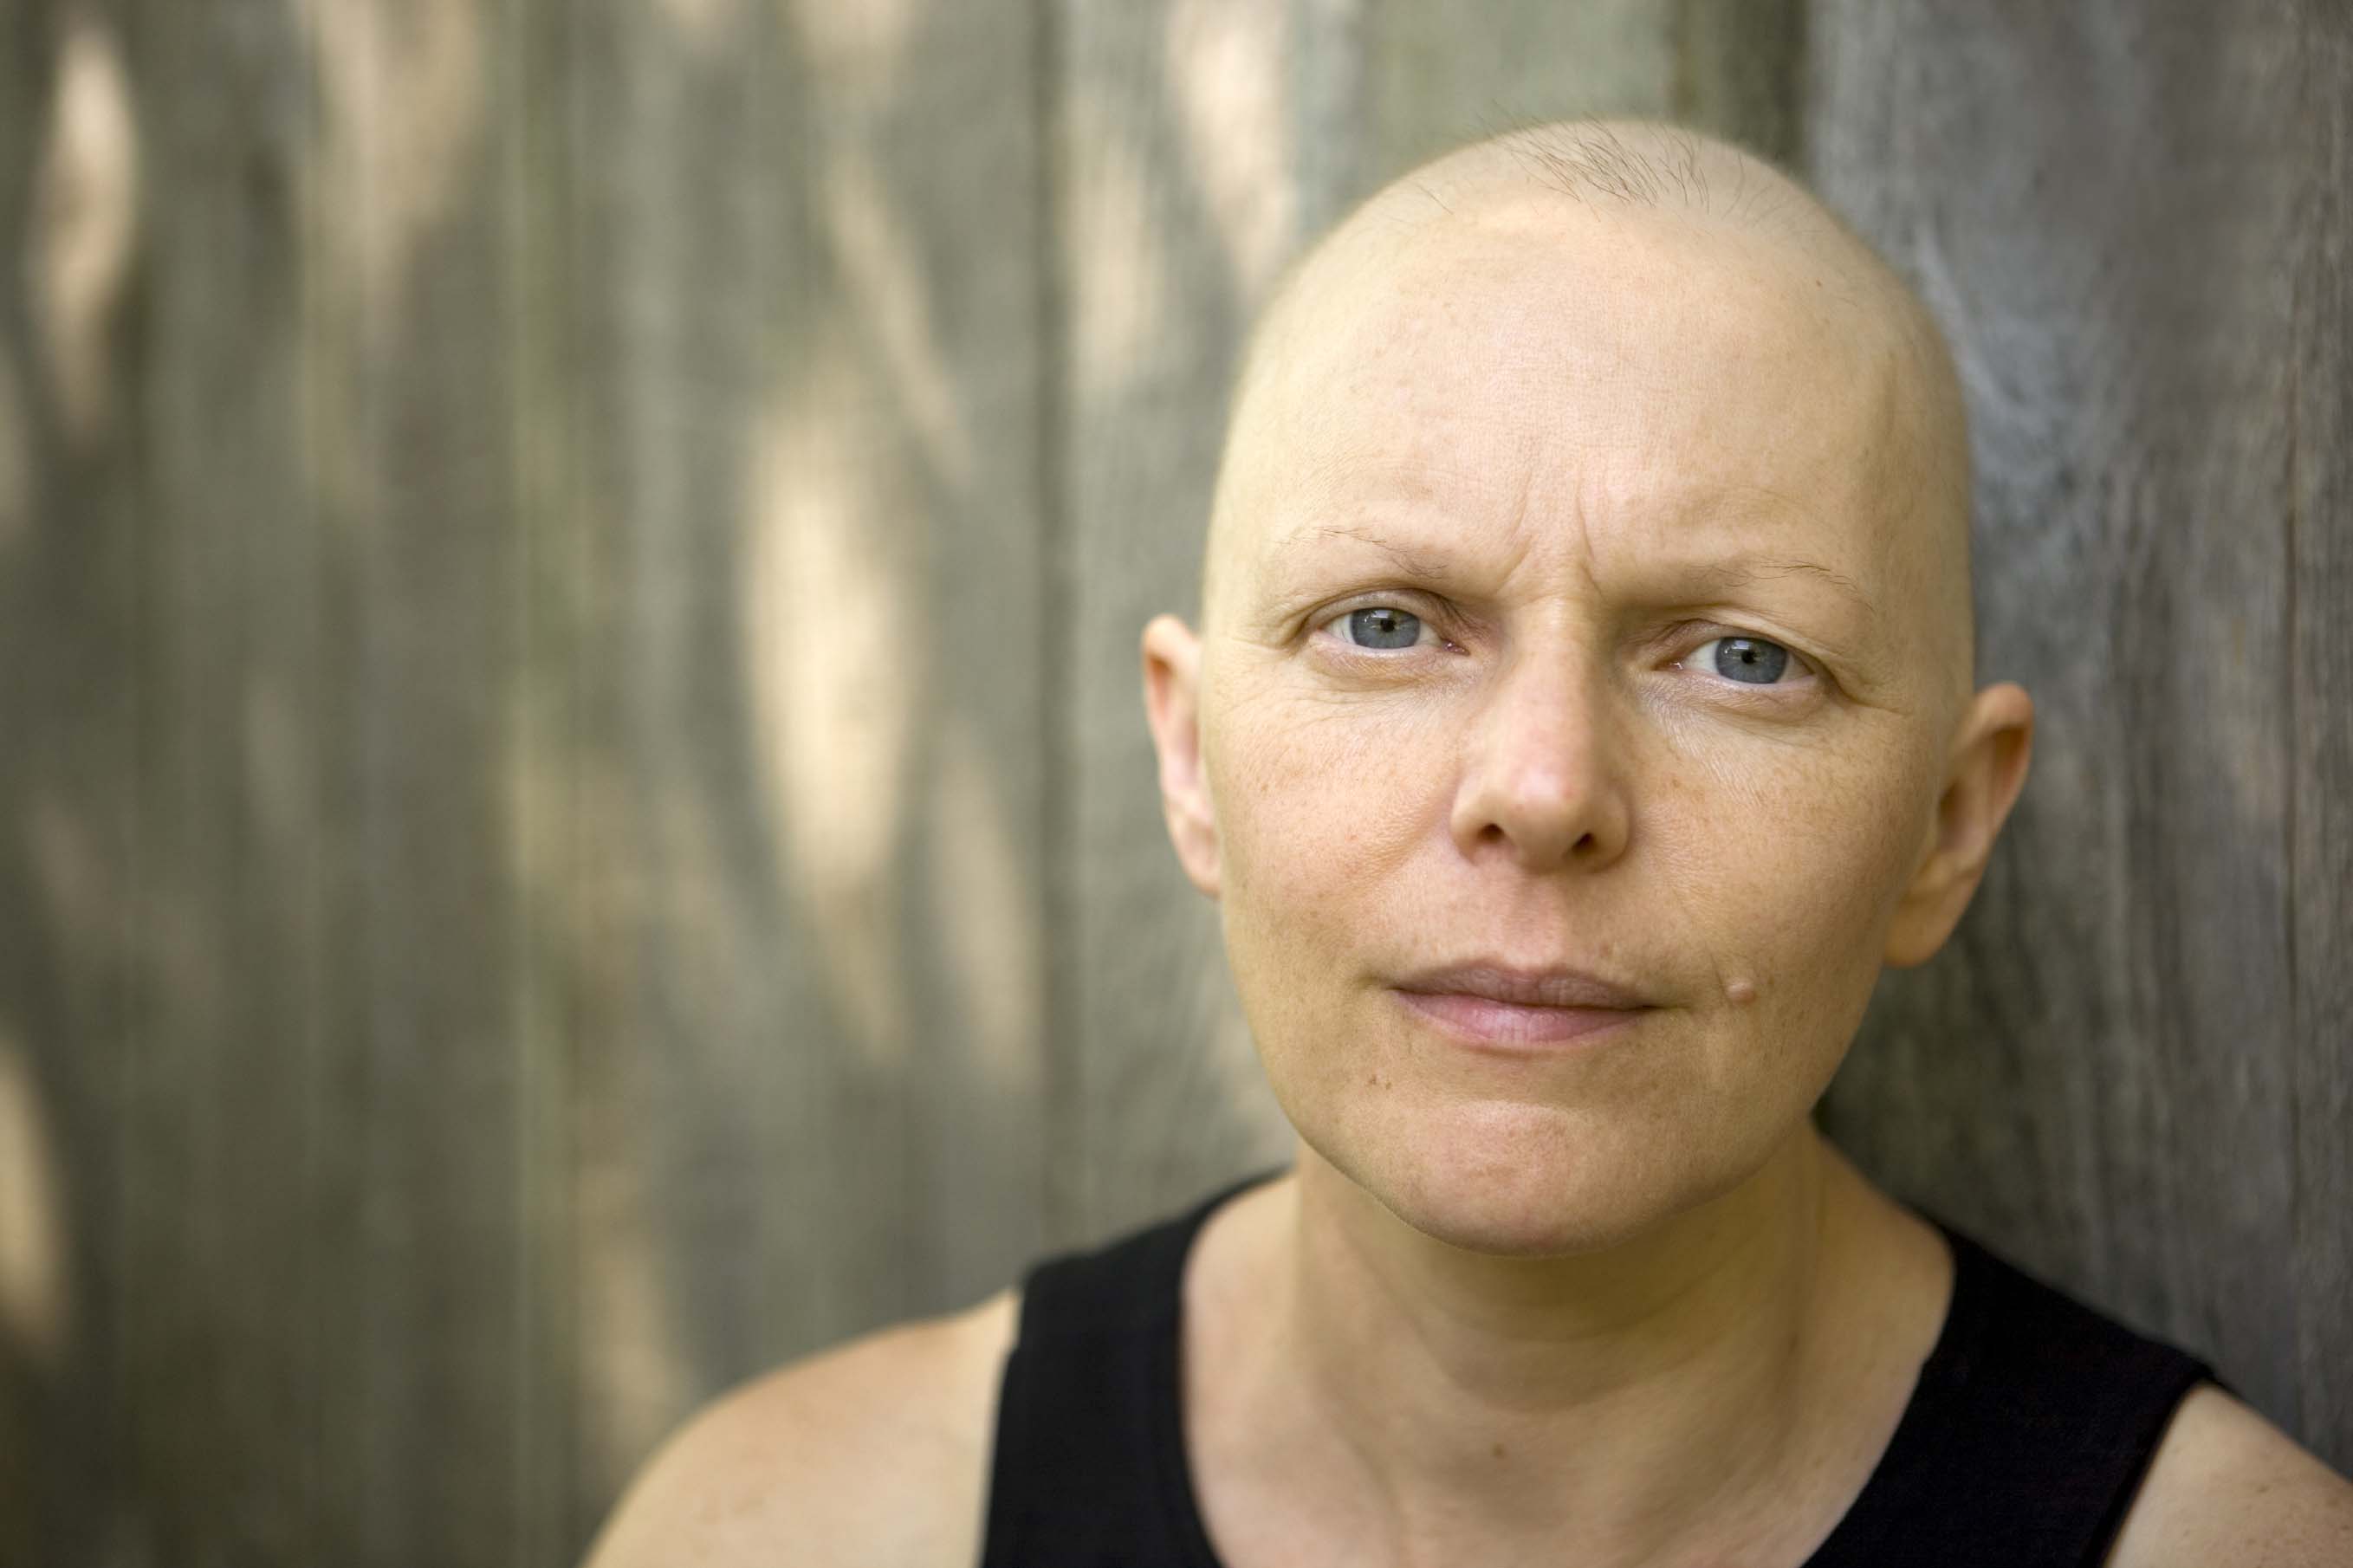 image of woman with cancer